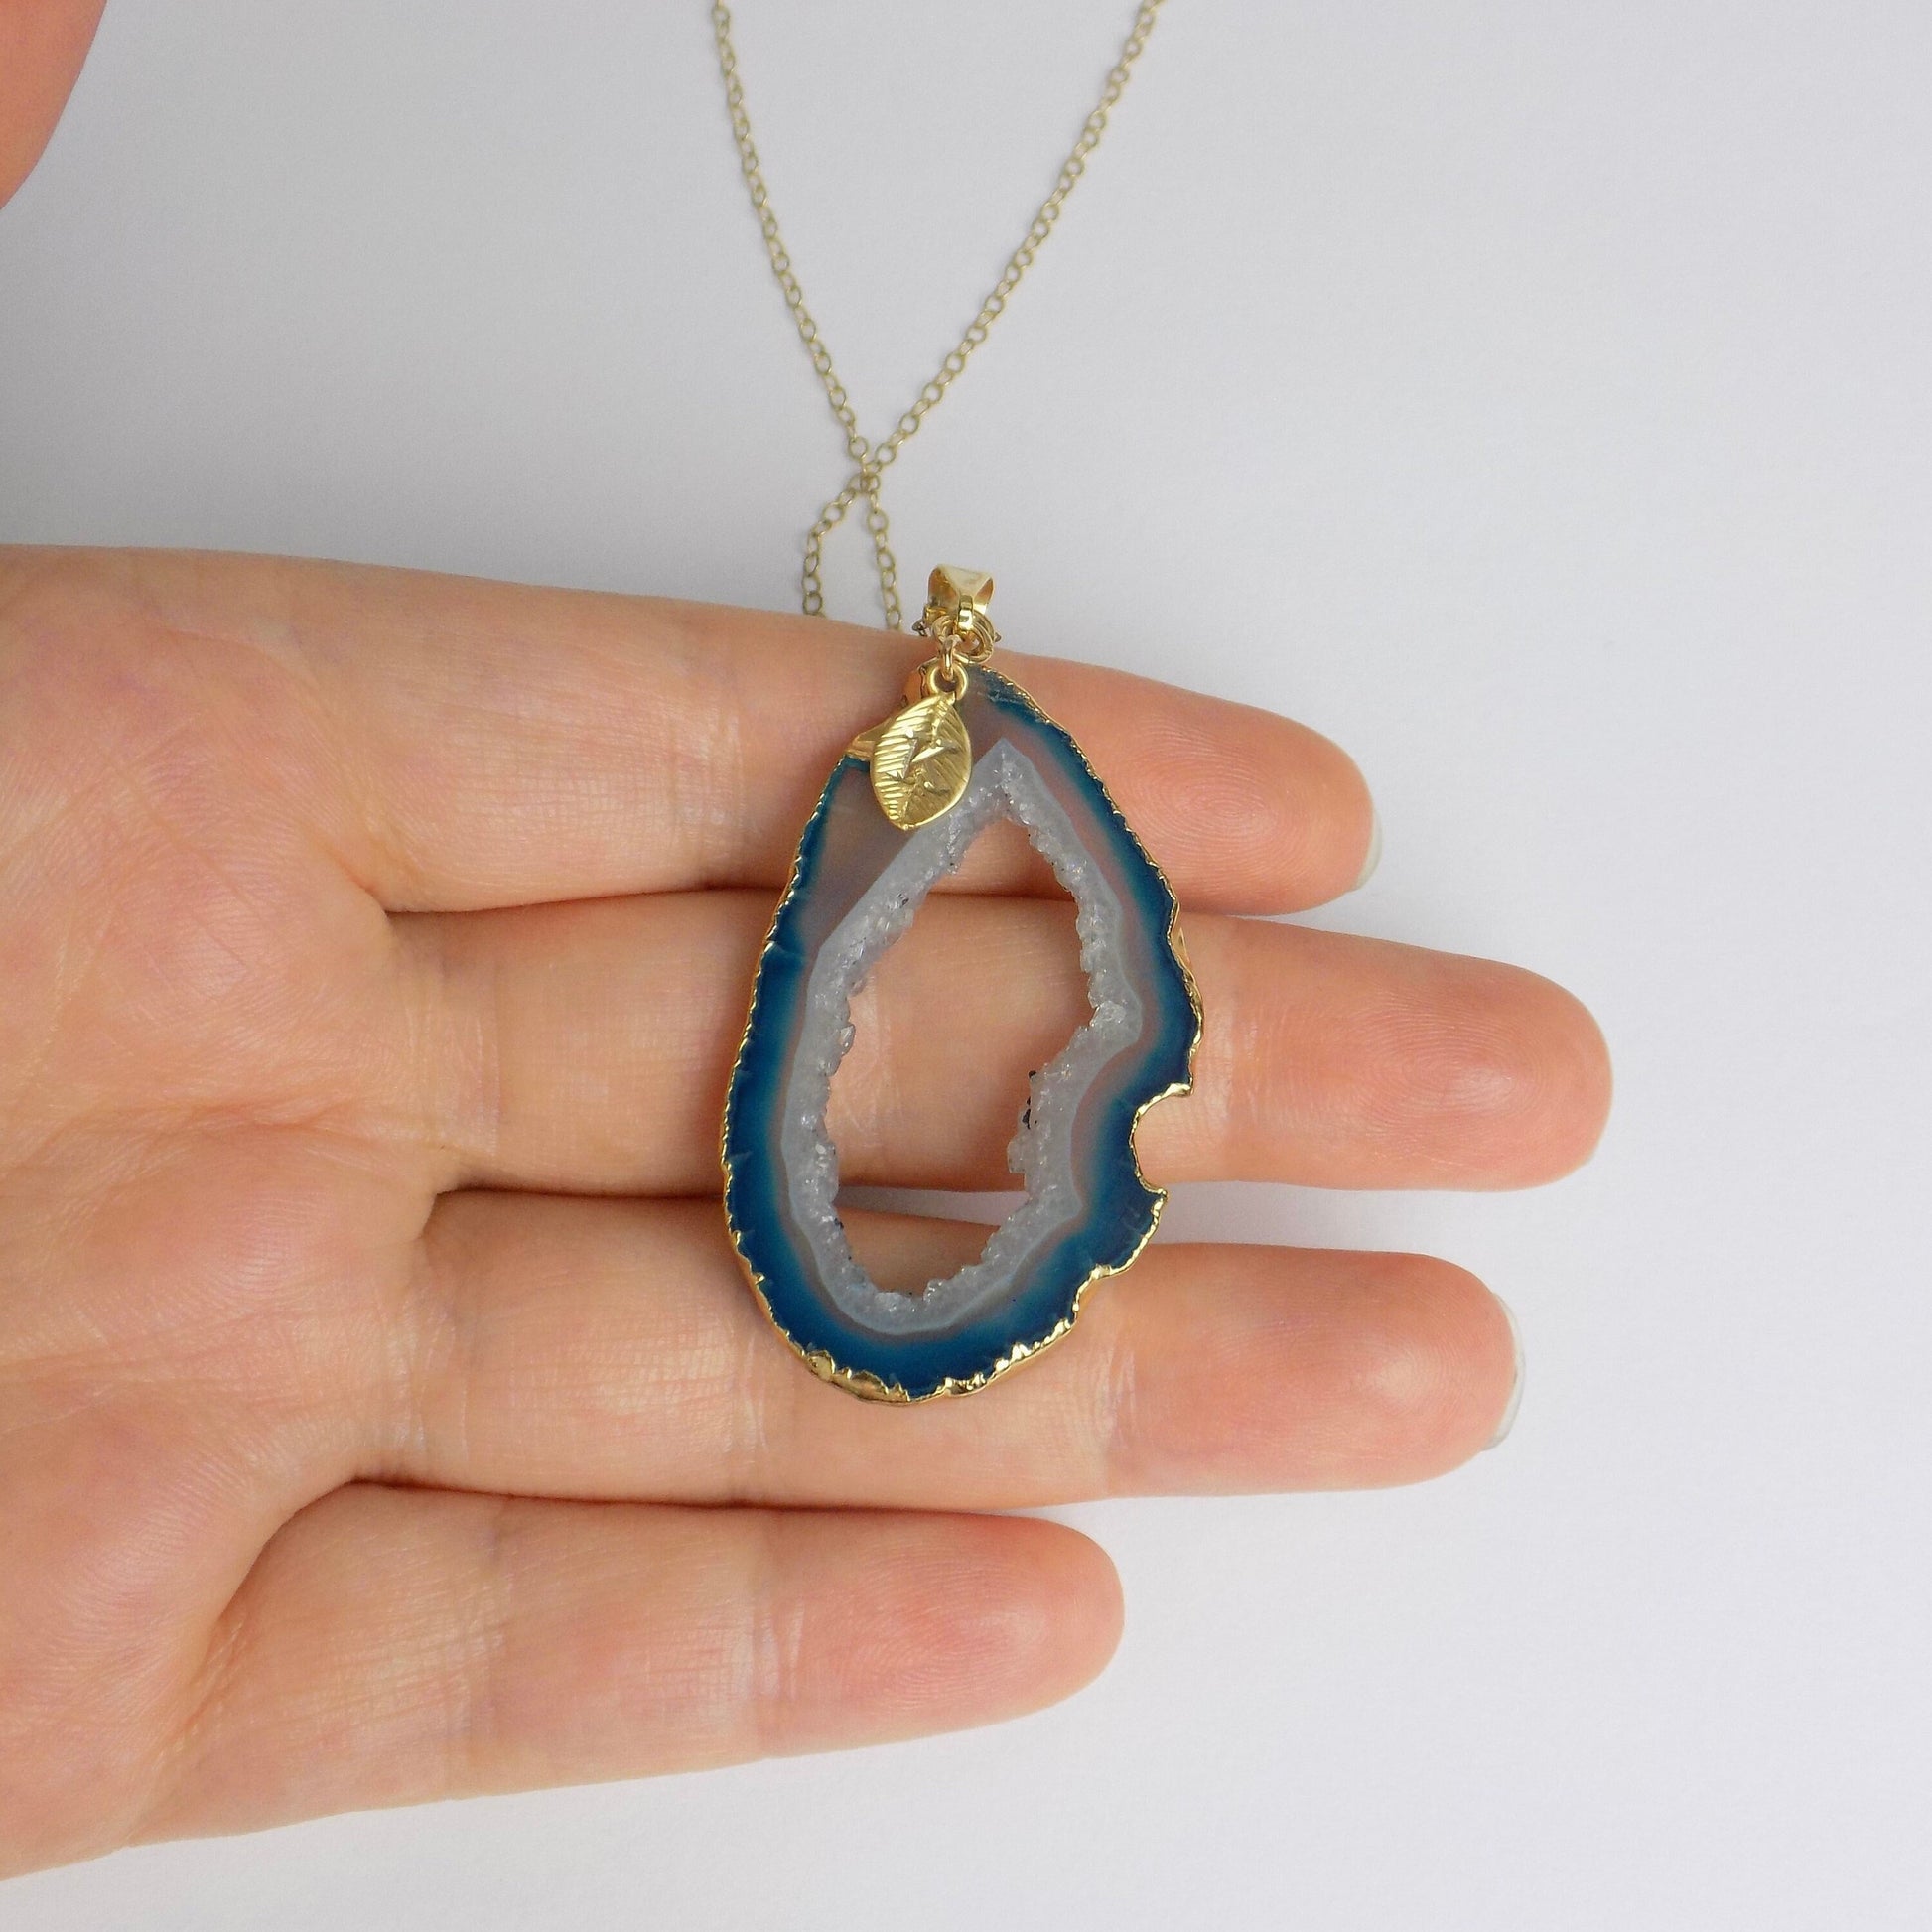 Natural Geode Slice Crystal Necklace in Teal Blue Gold Dipped with Custom Stamped Initial, G14-843